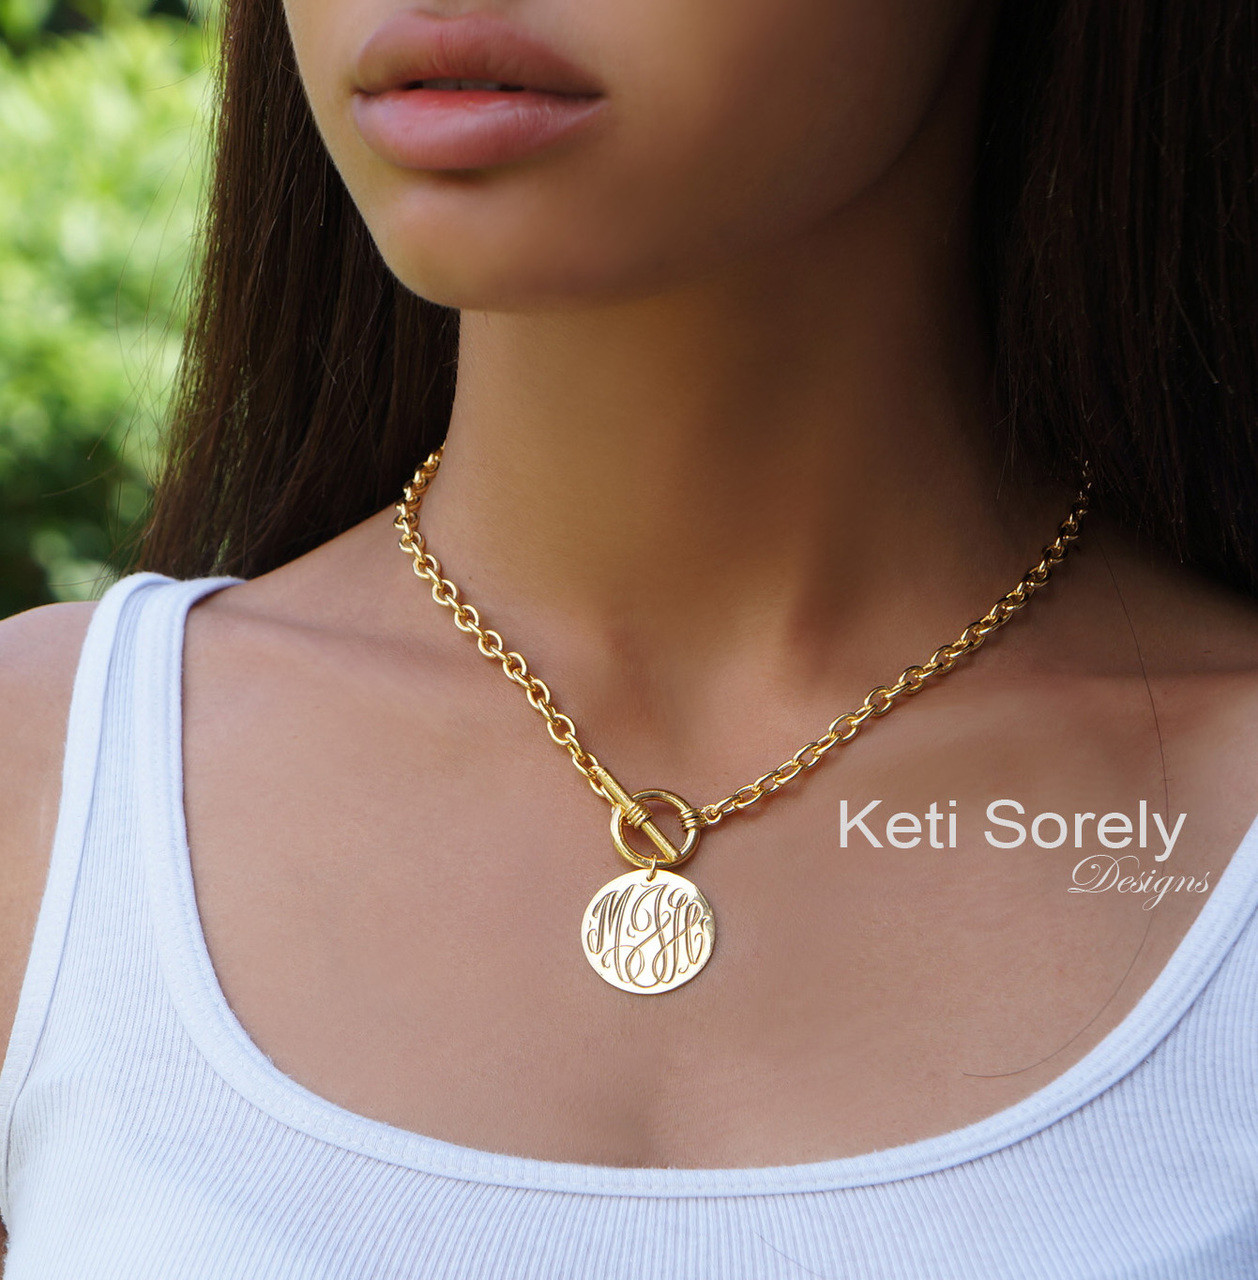 Personalized Toggle Necklace With Monogram Initials Charm 